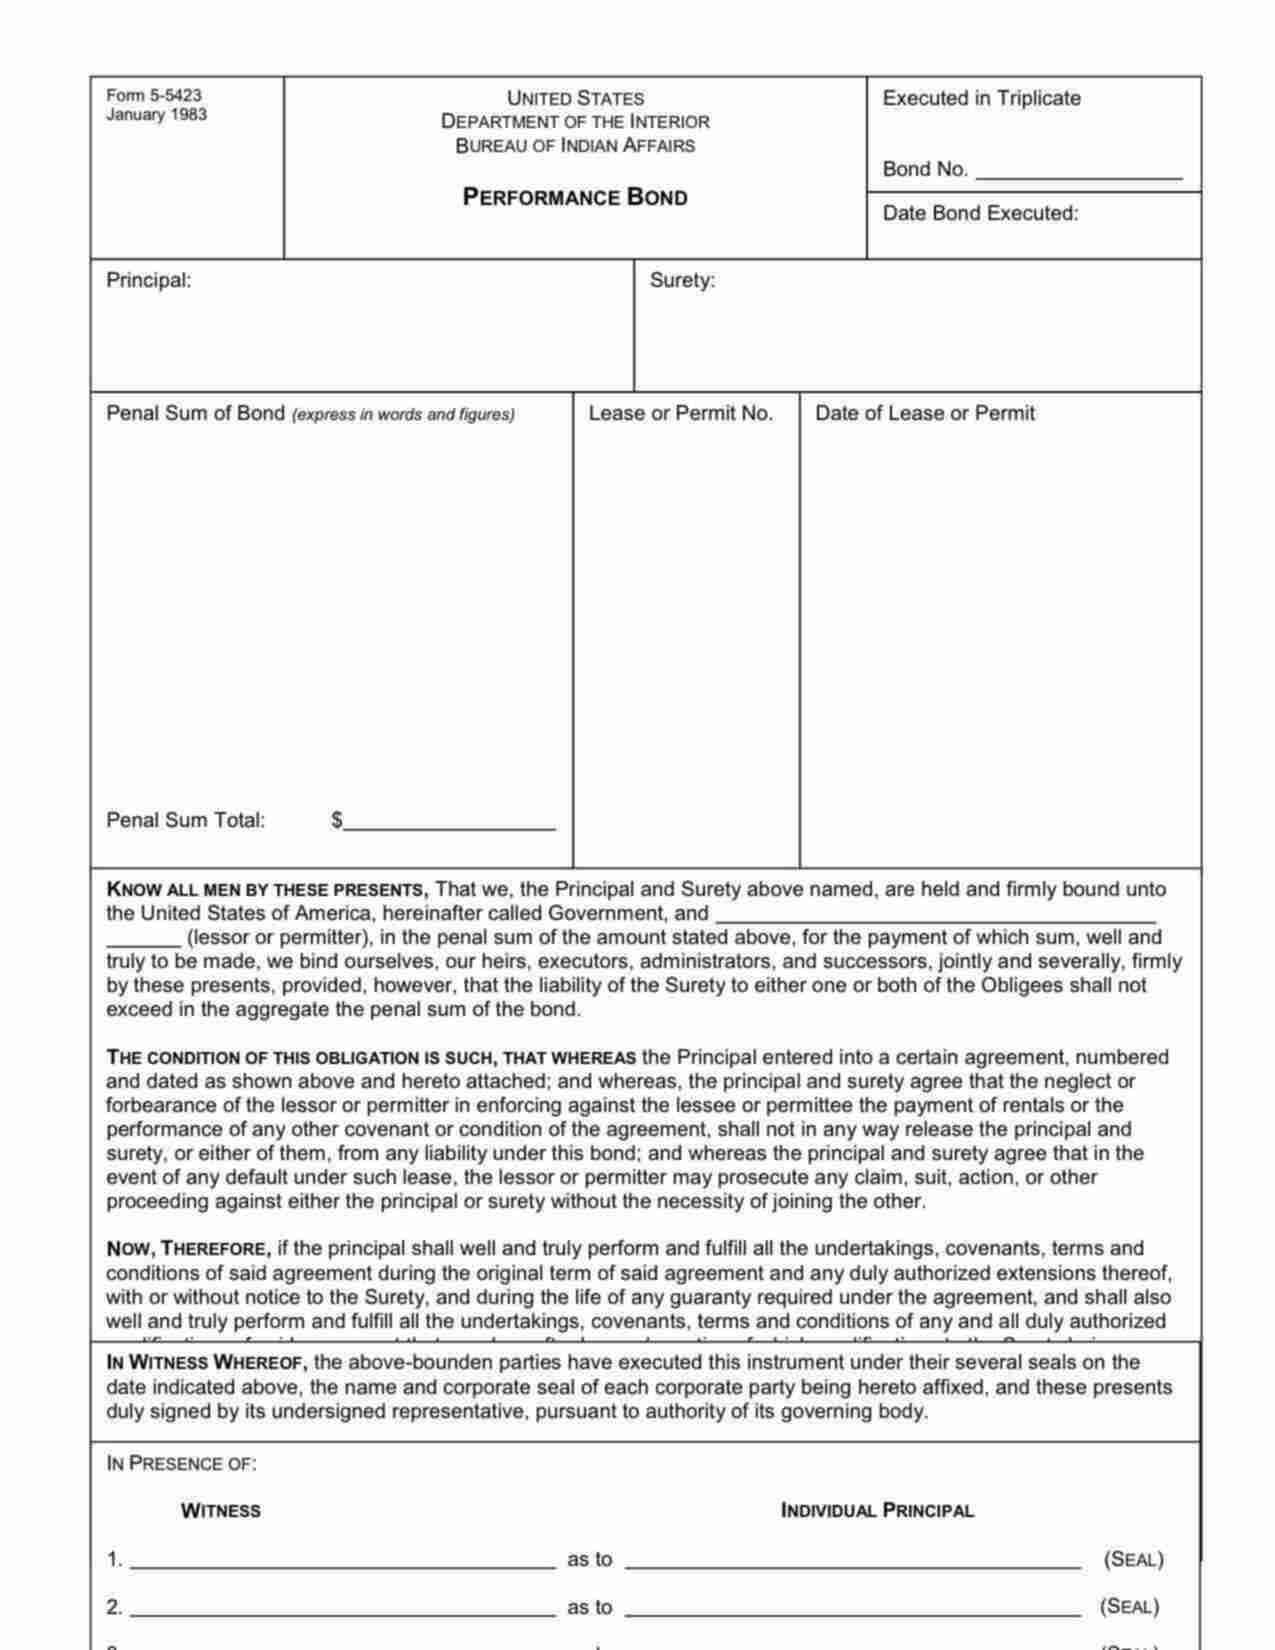 Federal Indian Lease or Permit Bond Form